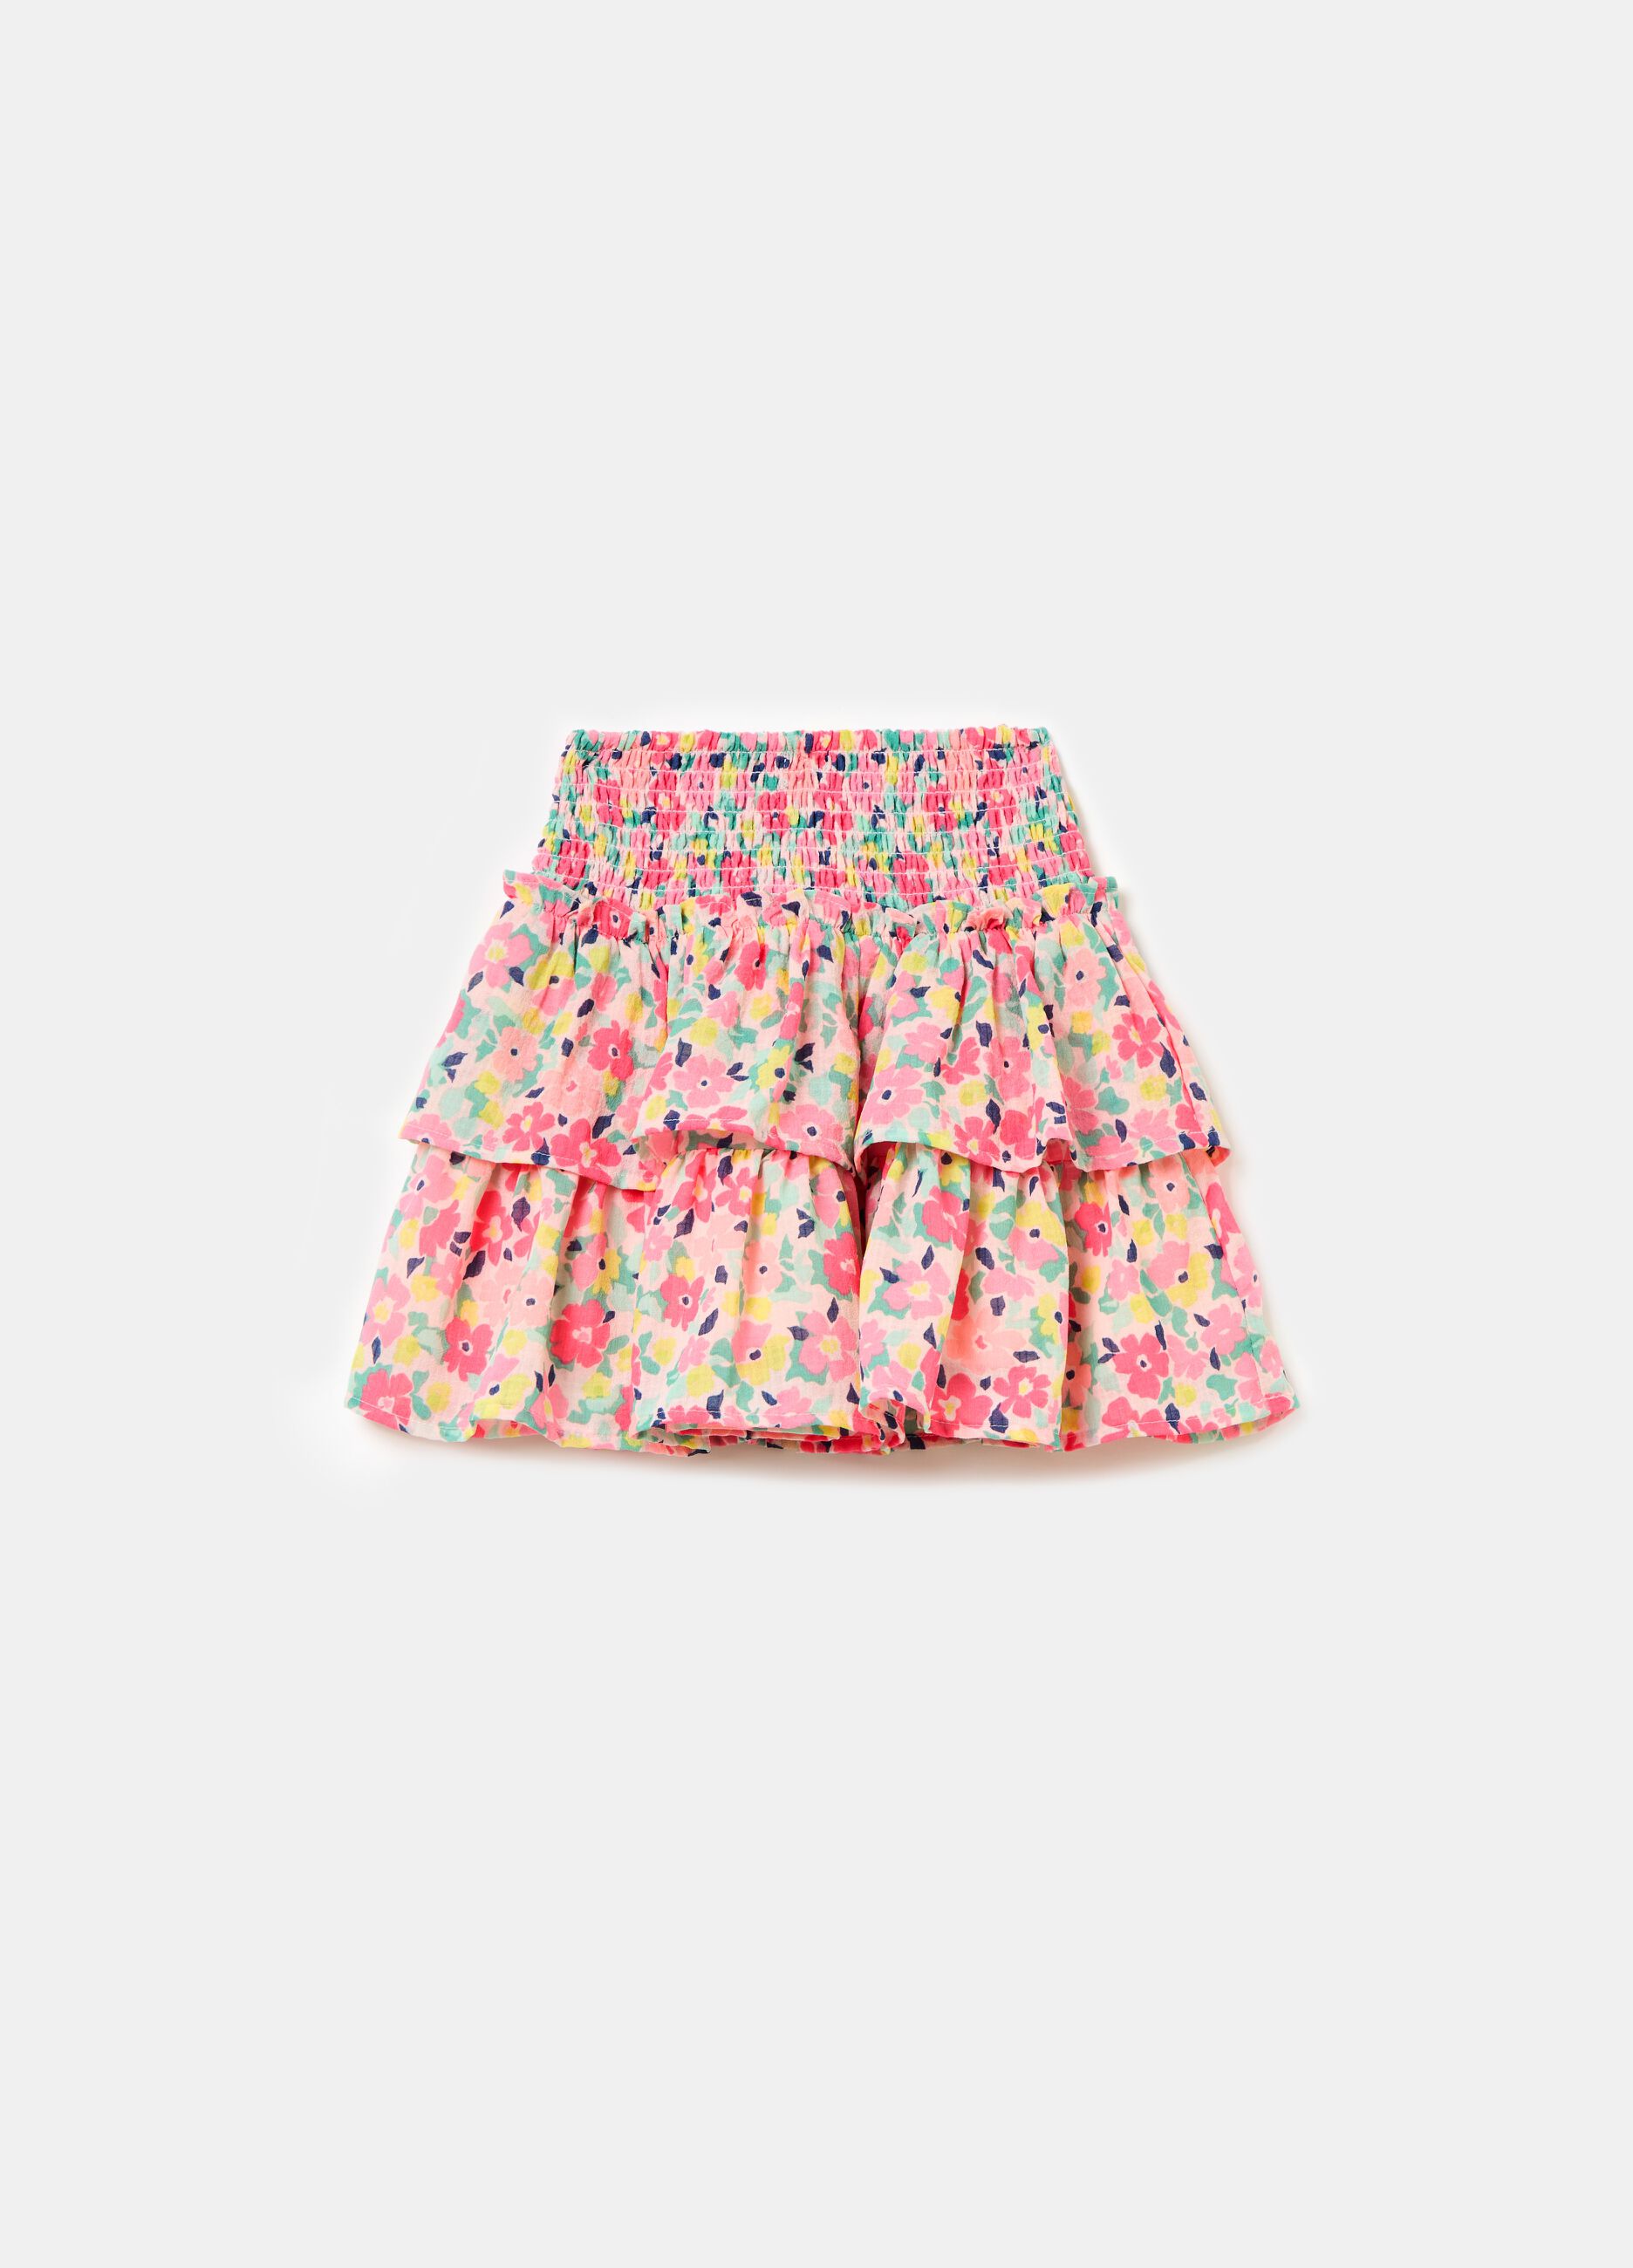 Tiered skirt with floral pattern